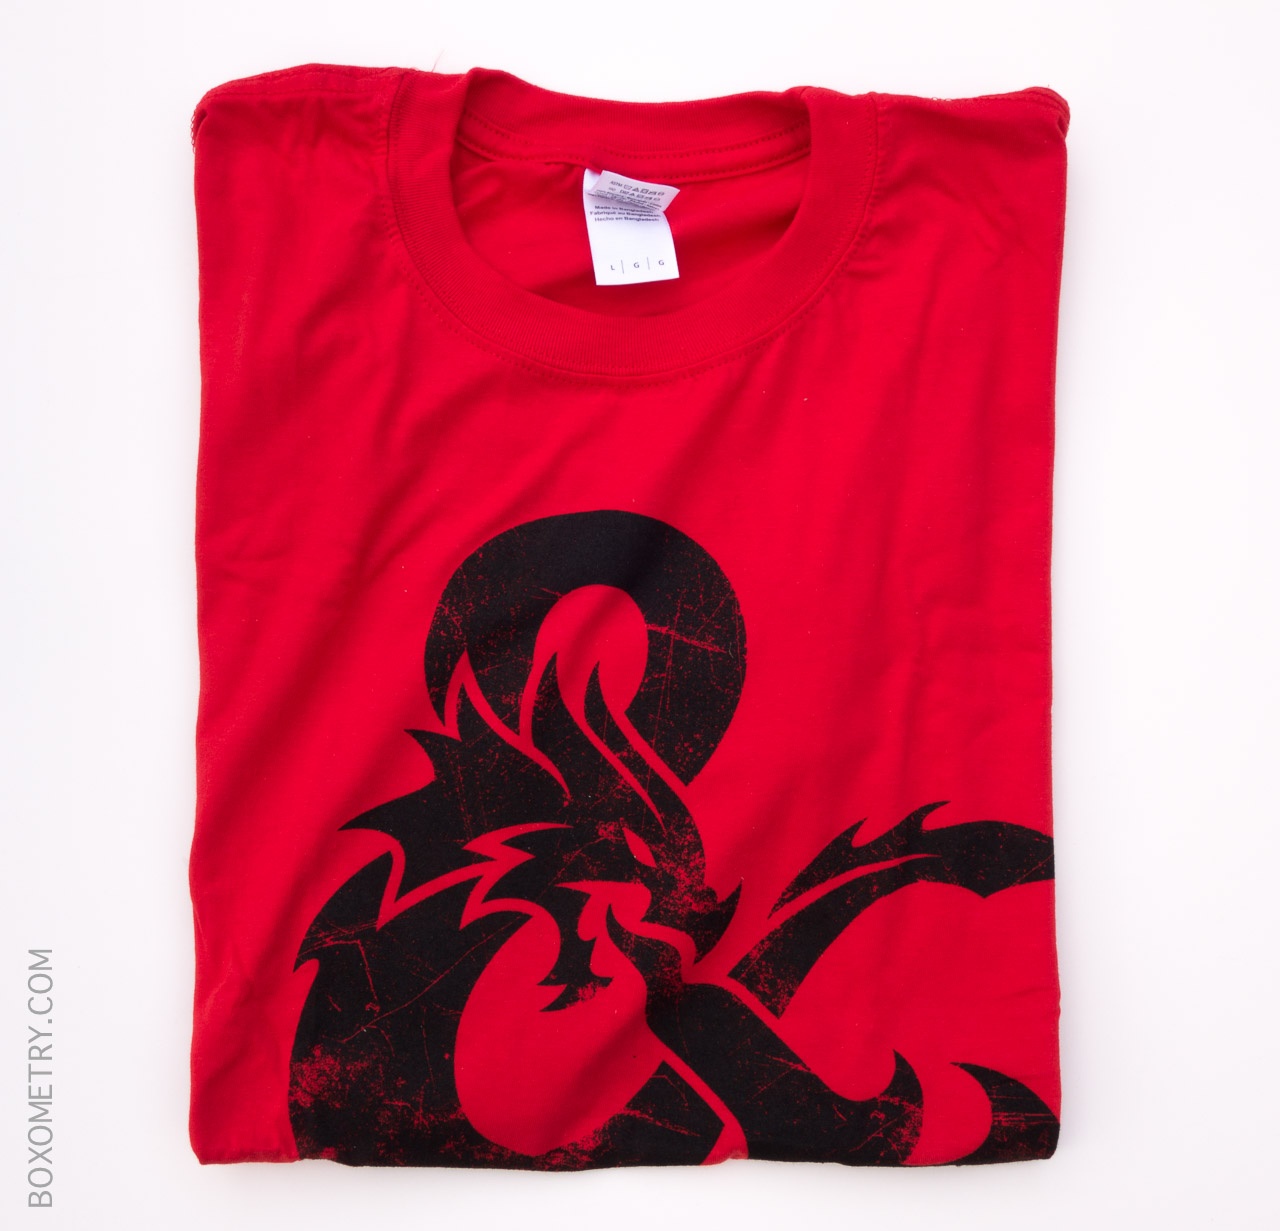 Loot Crate April 2015 Exclusive Dungeons & Dragons T-Shirt